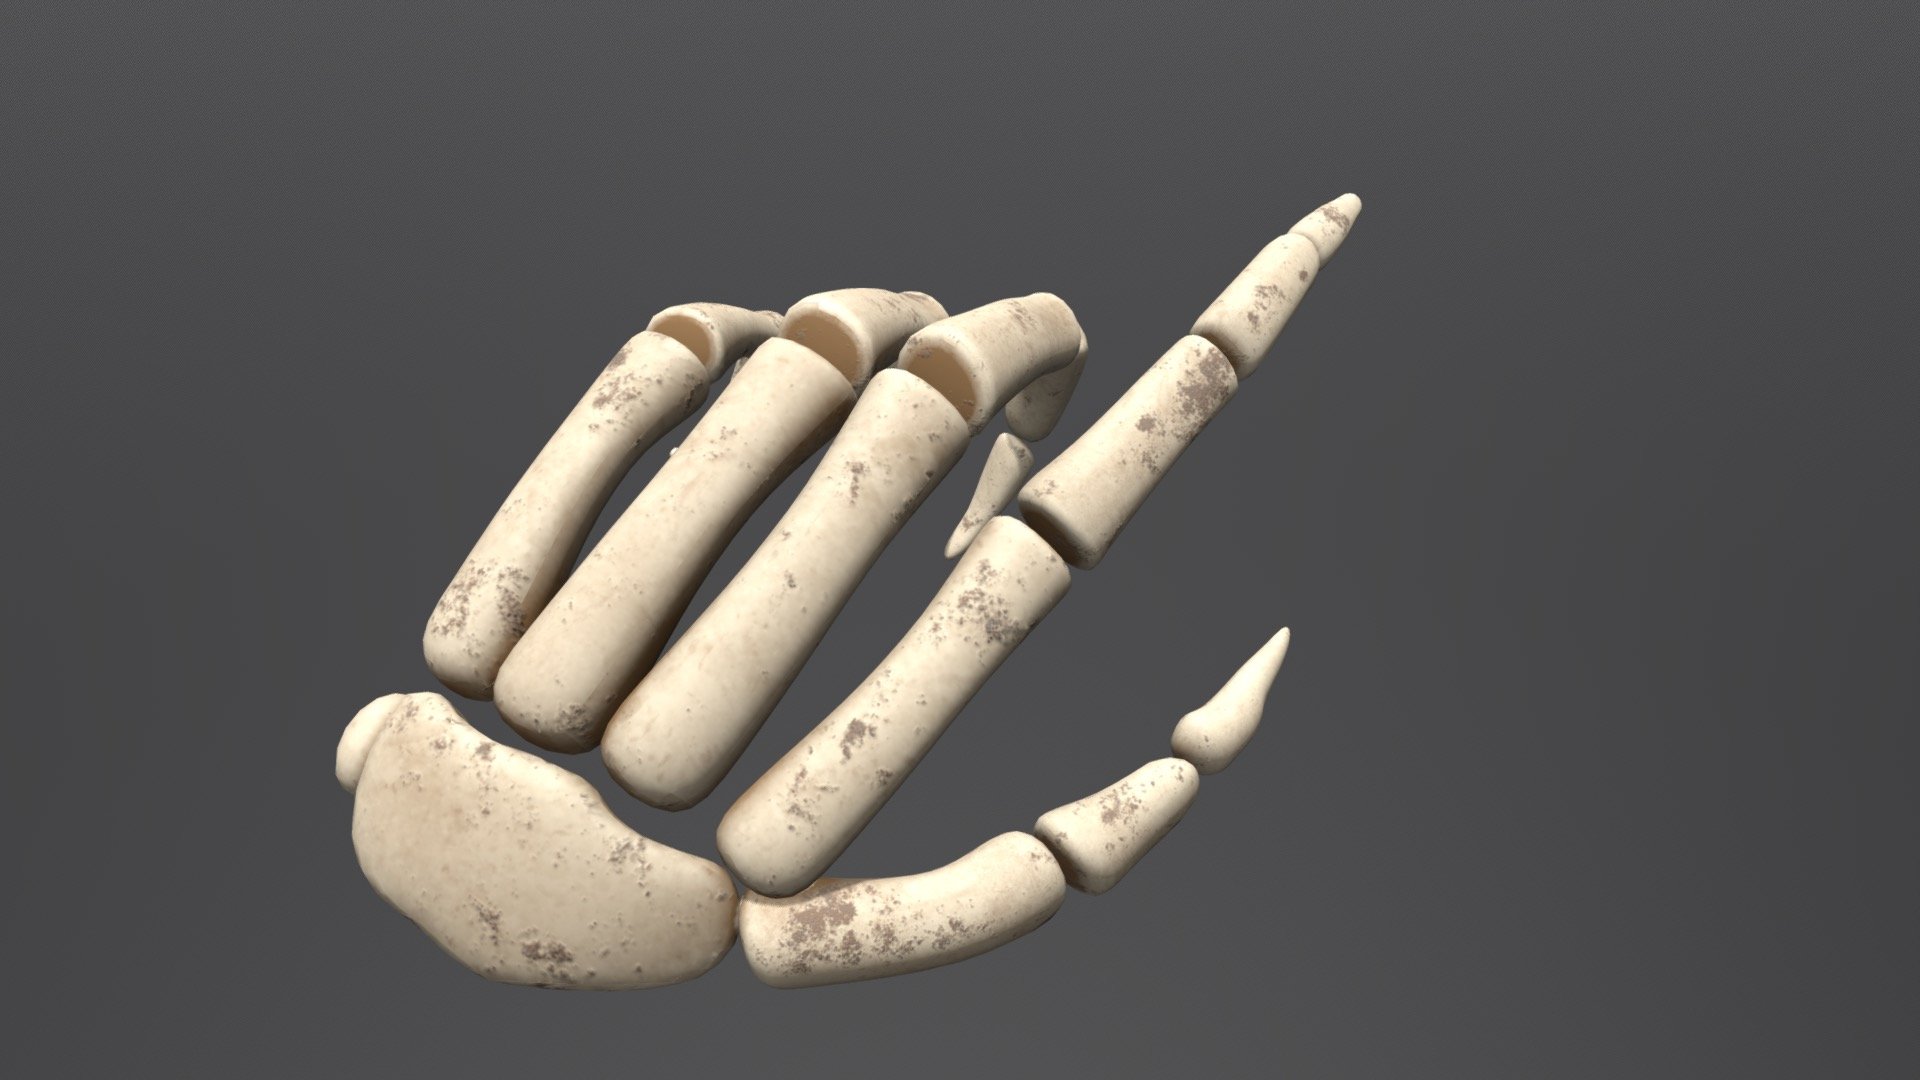 Skeleton Hand Model.  To be used as a cursor for Pirate Moba/RTS type Game 3d model